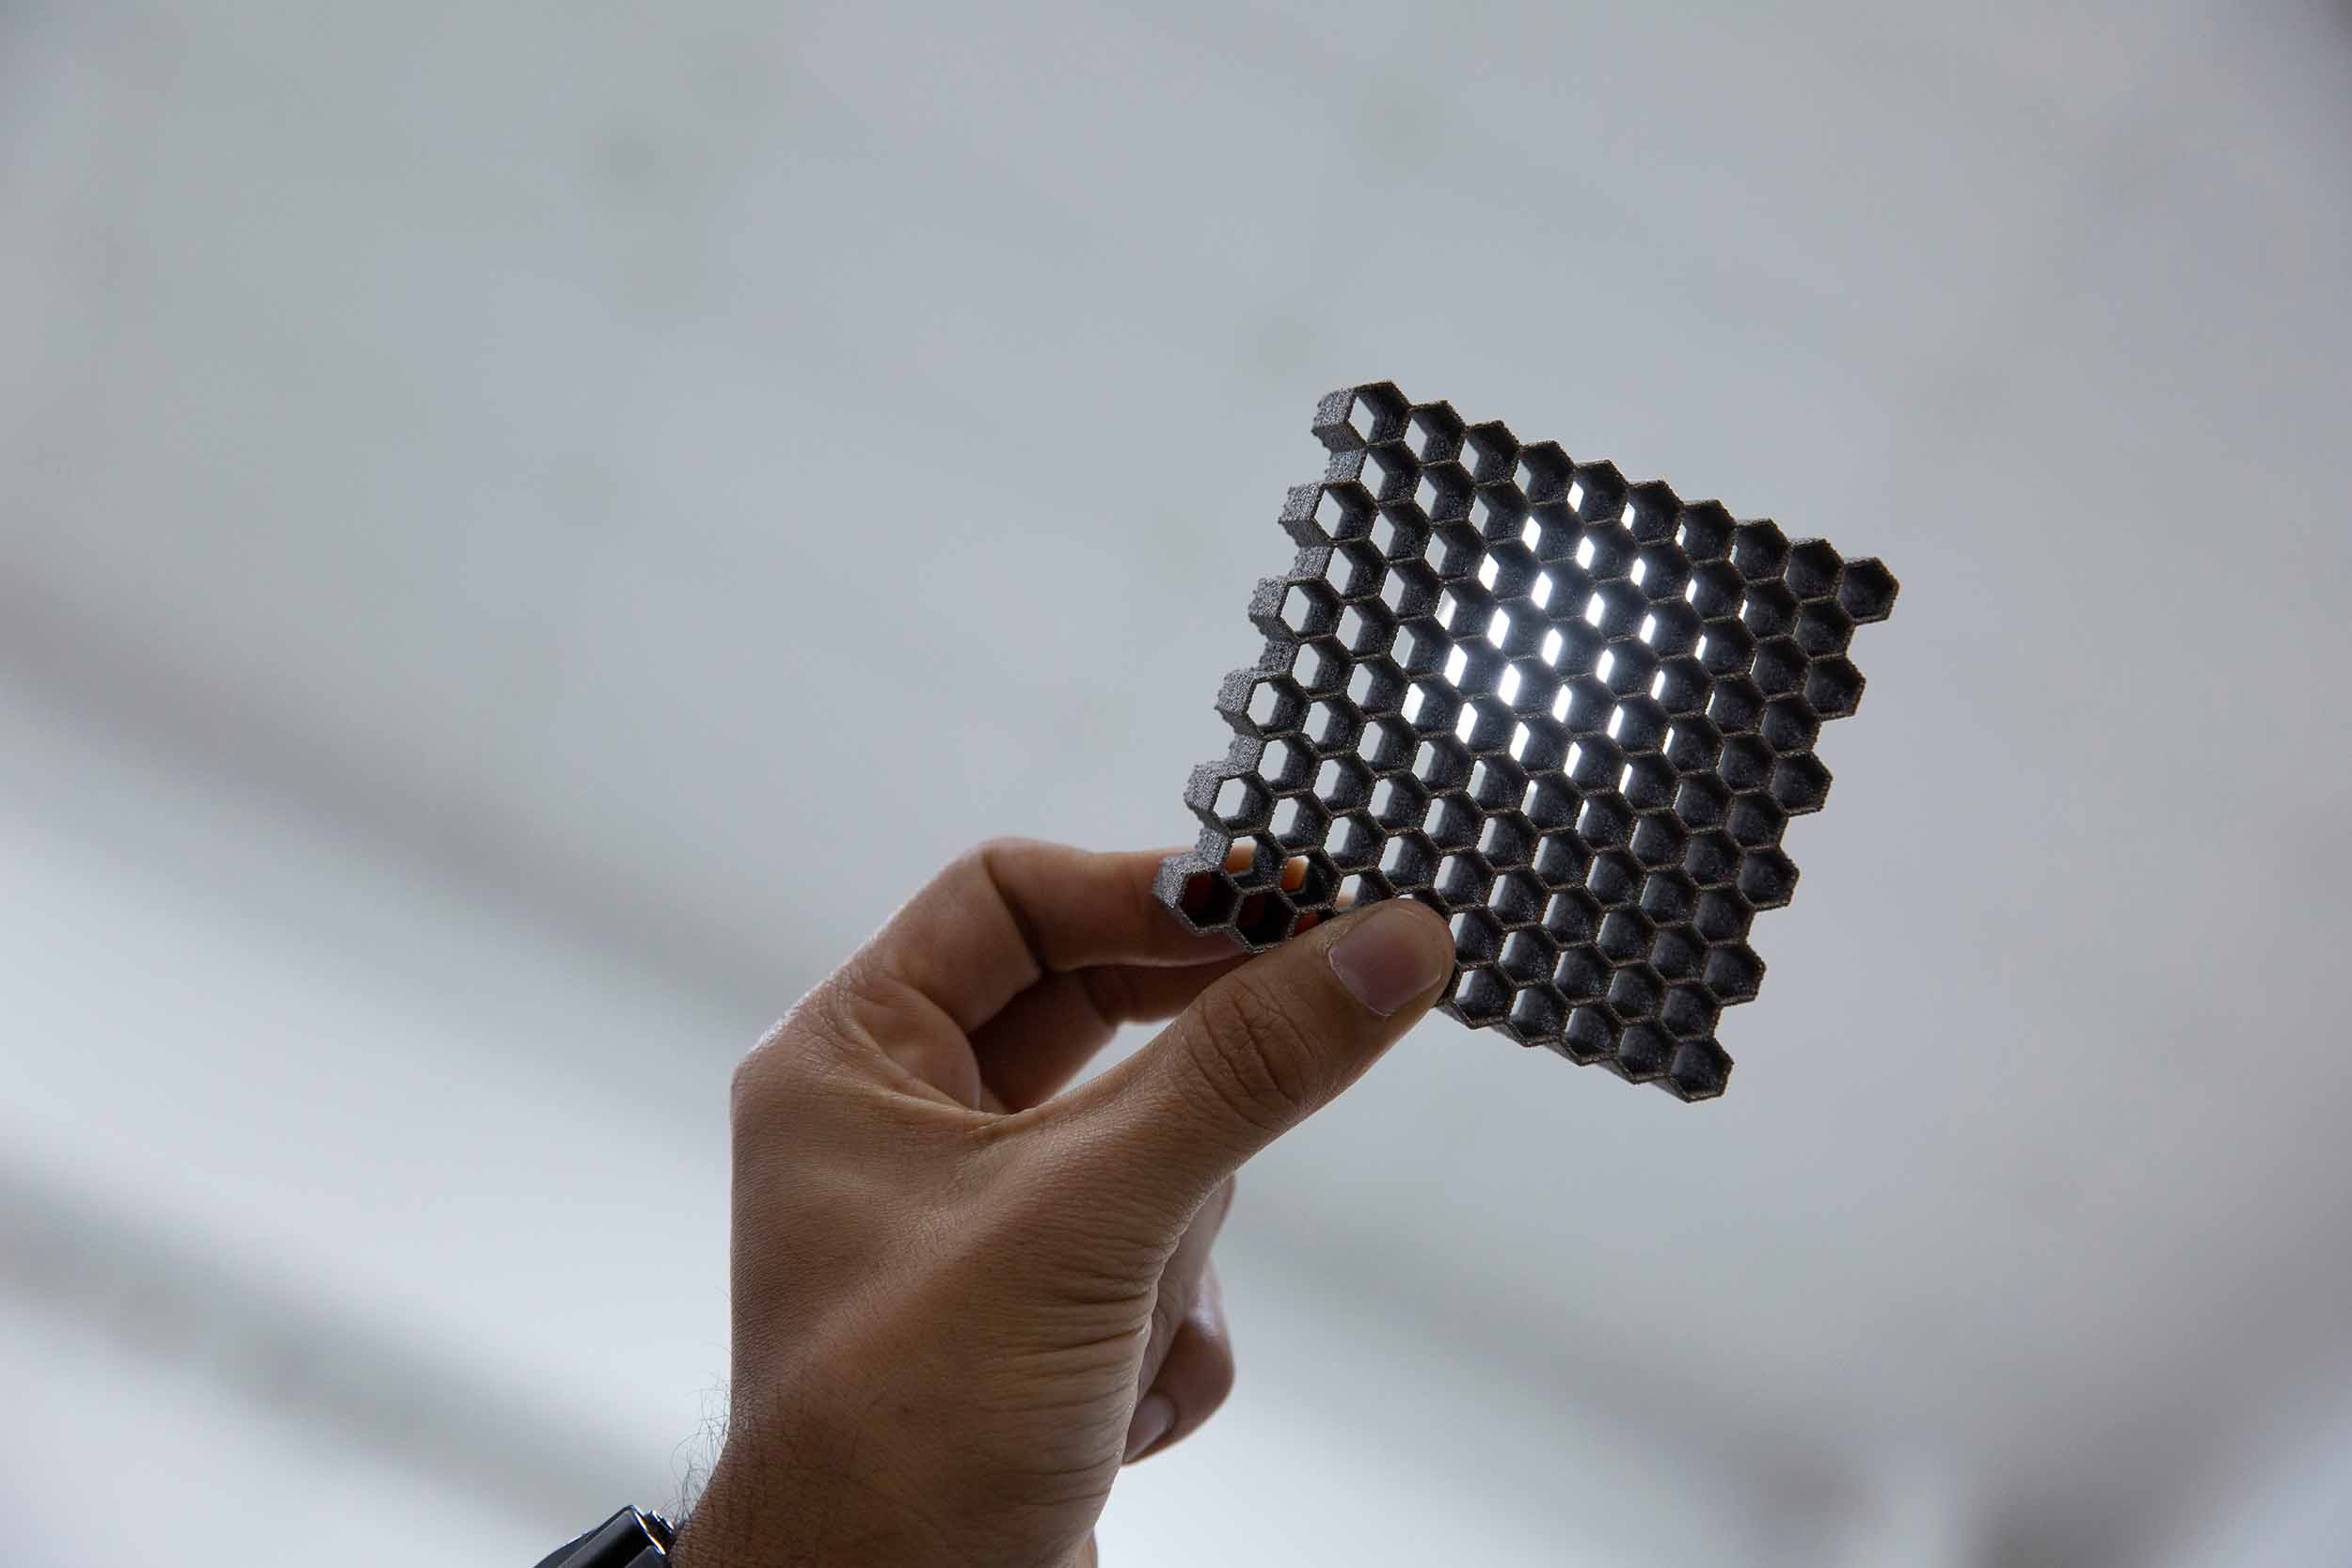 Dgruv Bhate holds up a sample of a 3D printed hexagon structure modeled after a beehive